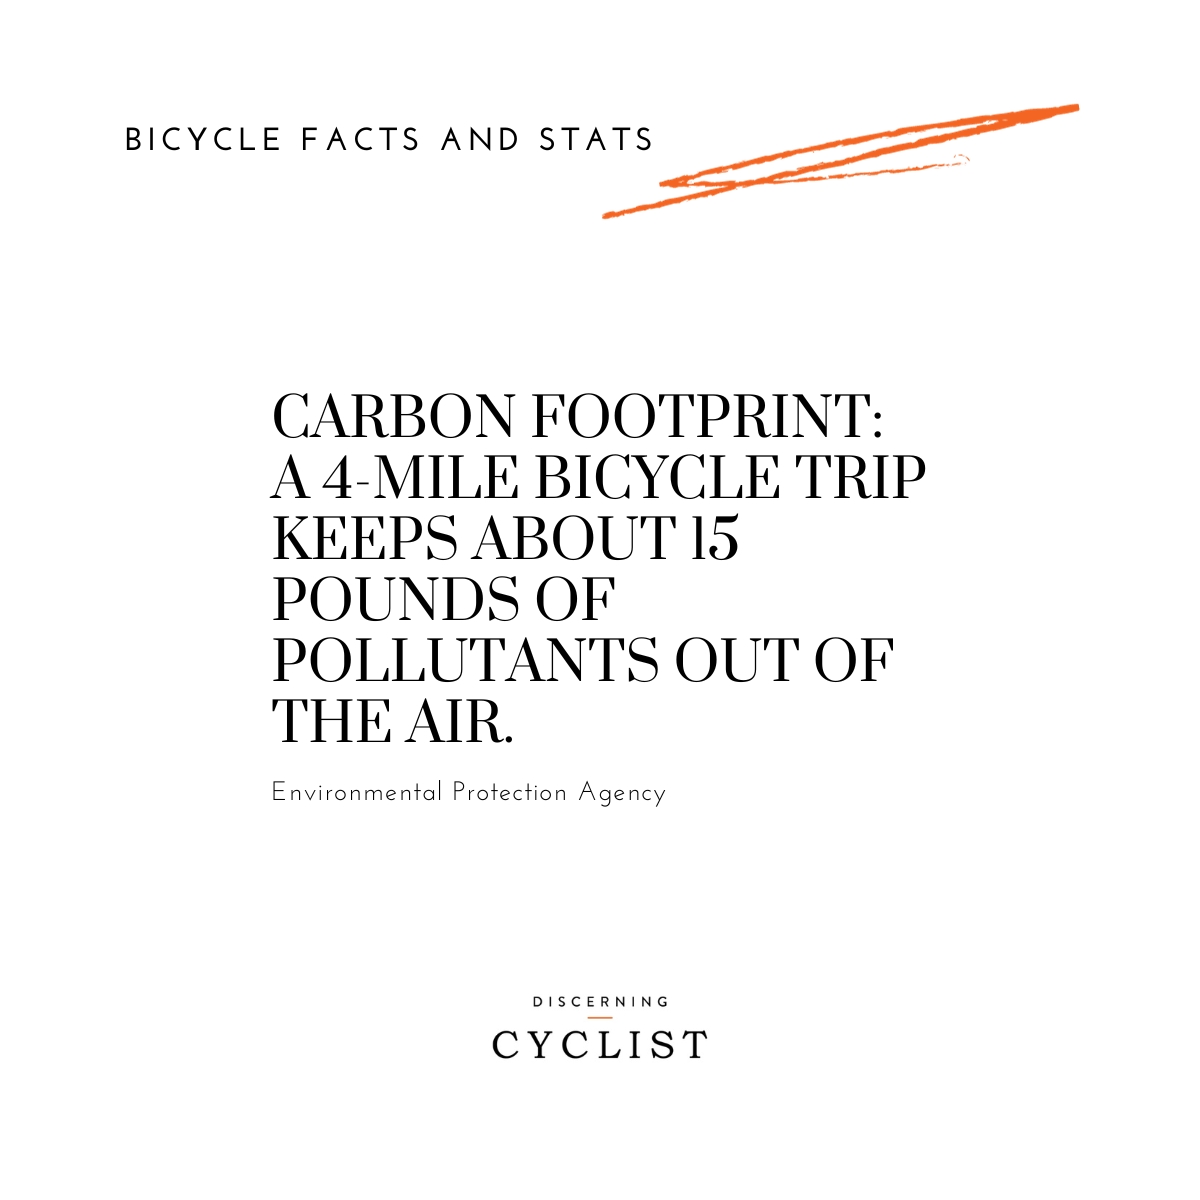 Carbon Footprint: A 4-mile bicycle trip keeps about 15 pounds of pollutants out of the air.